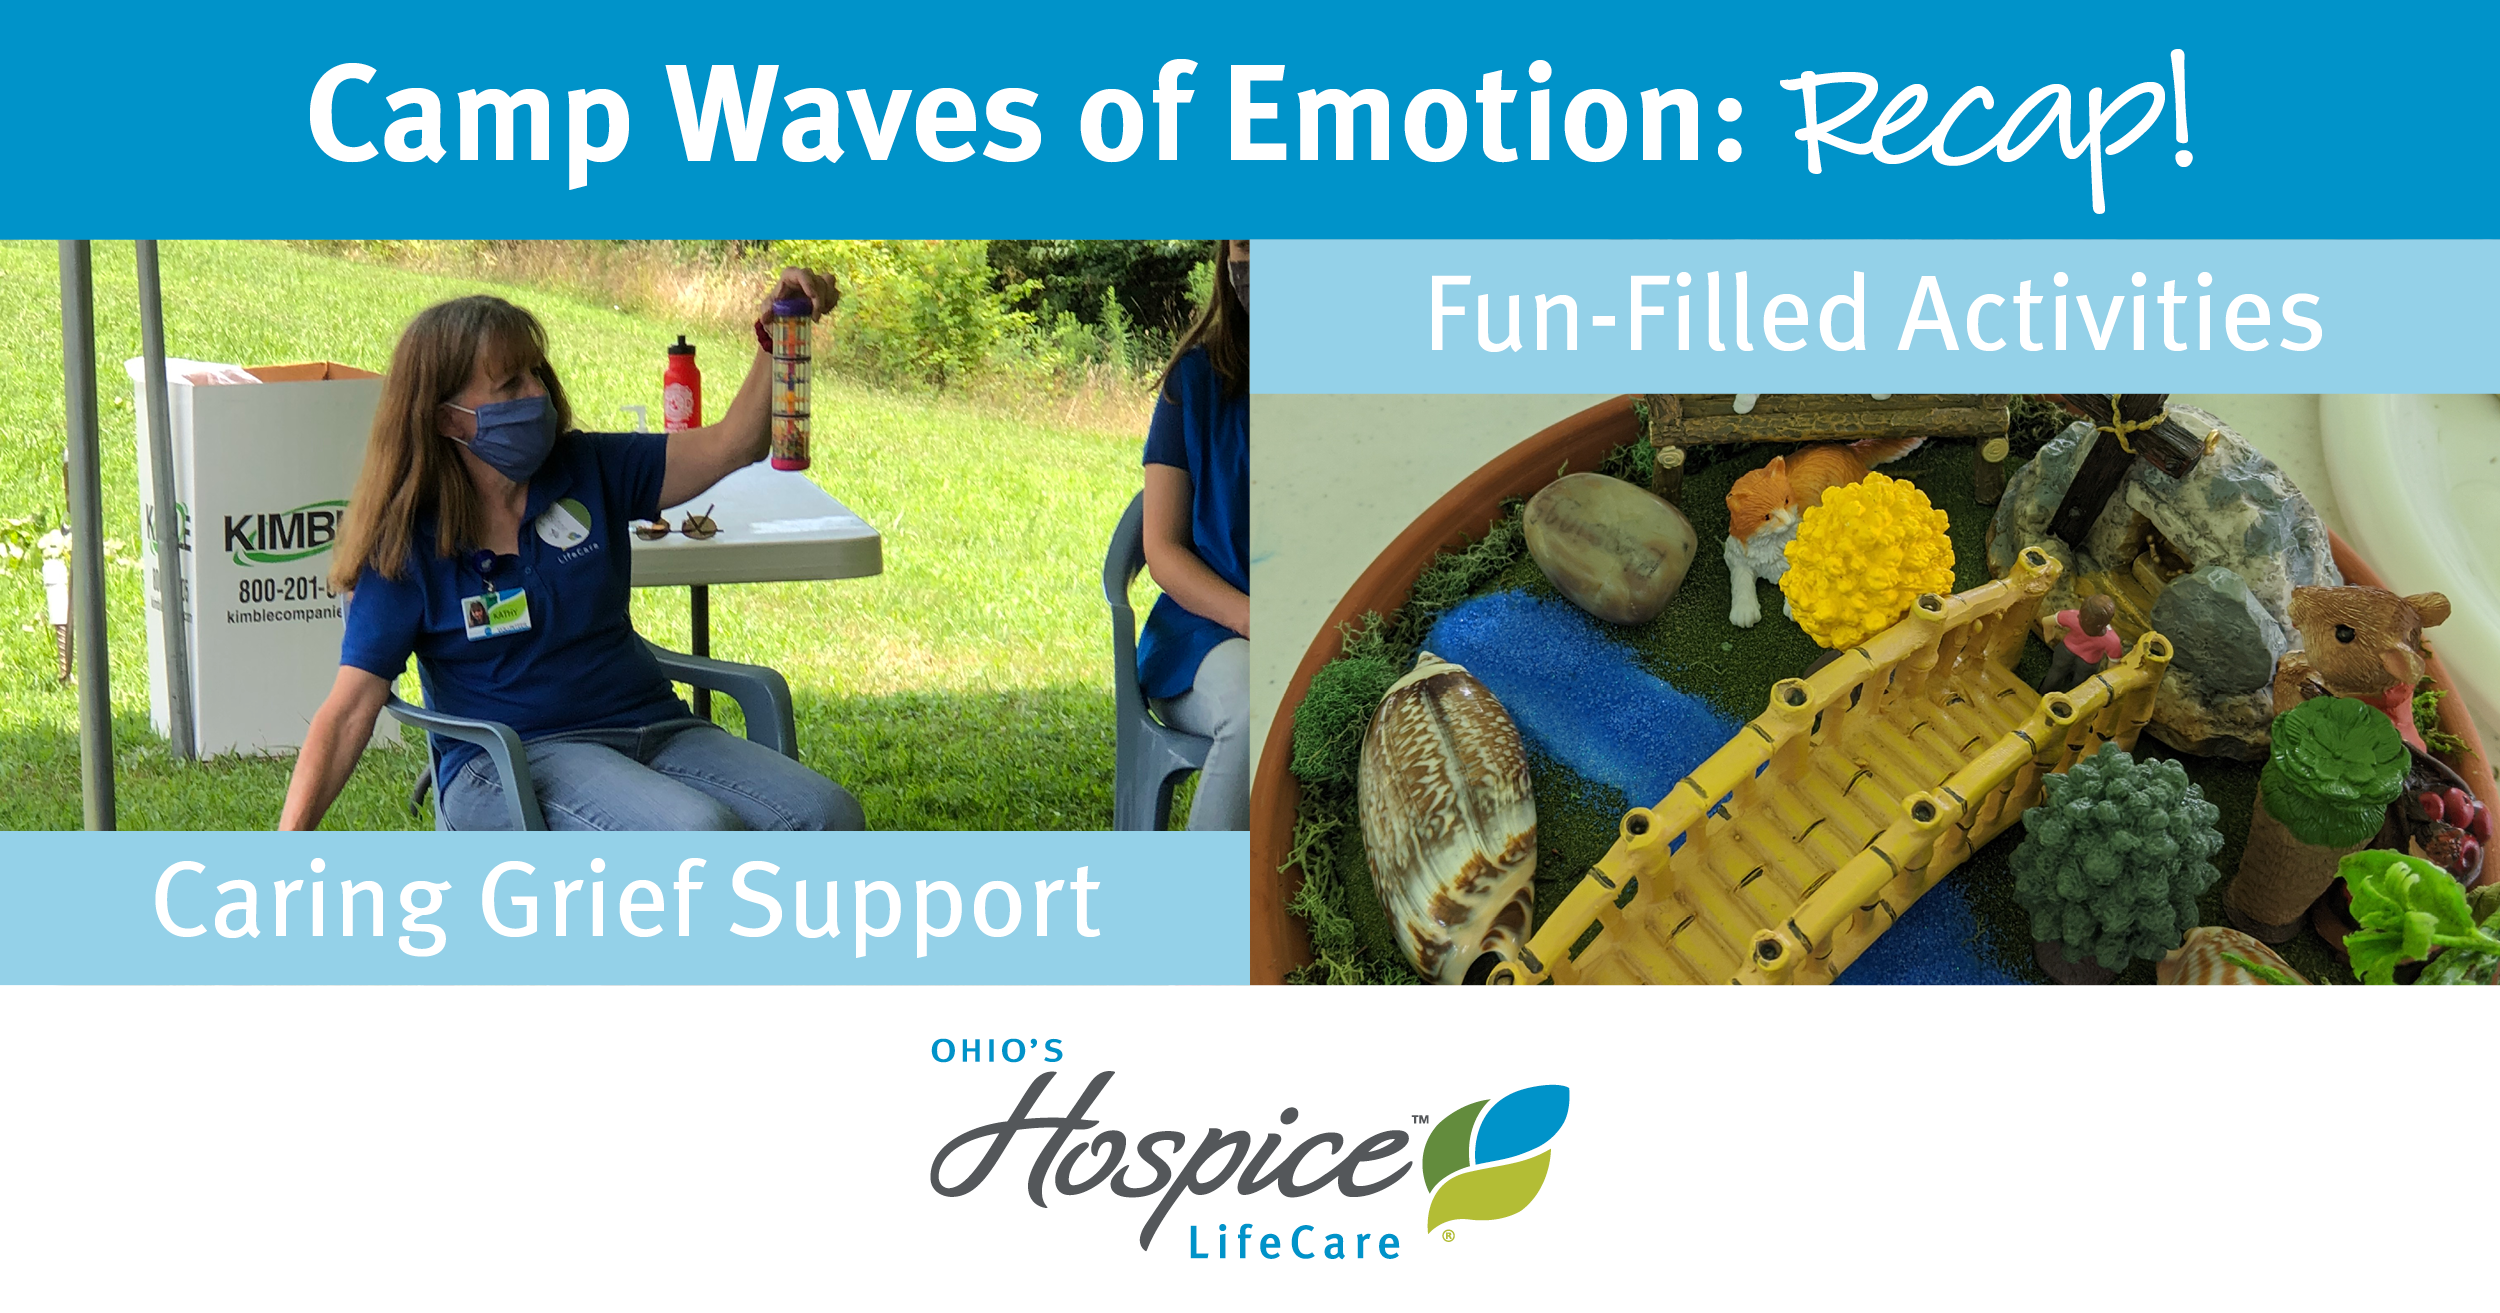 Camp Waves of Emotion: Recap! Caring Grief Support, Fun-Filled Activities